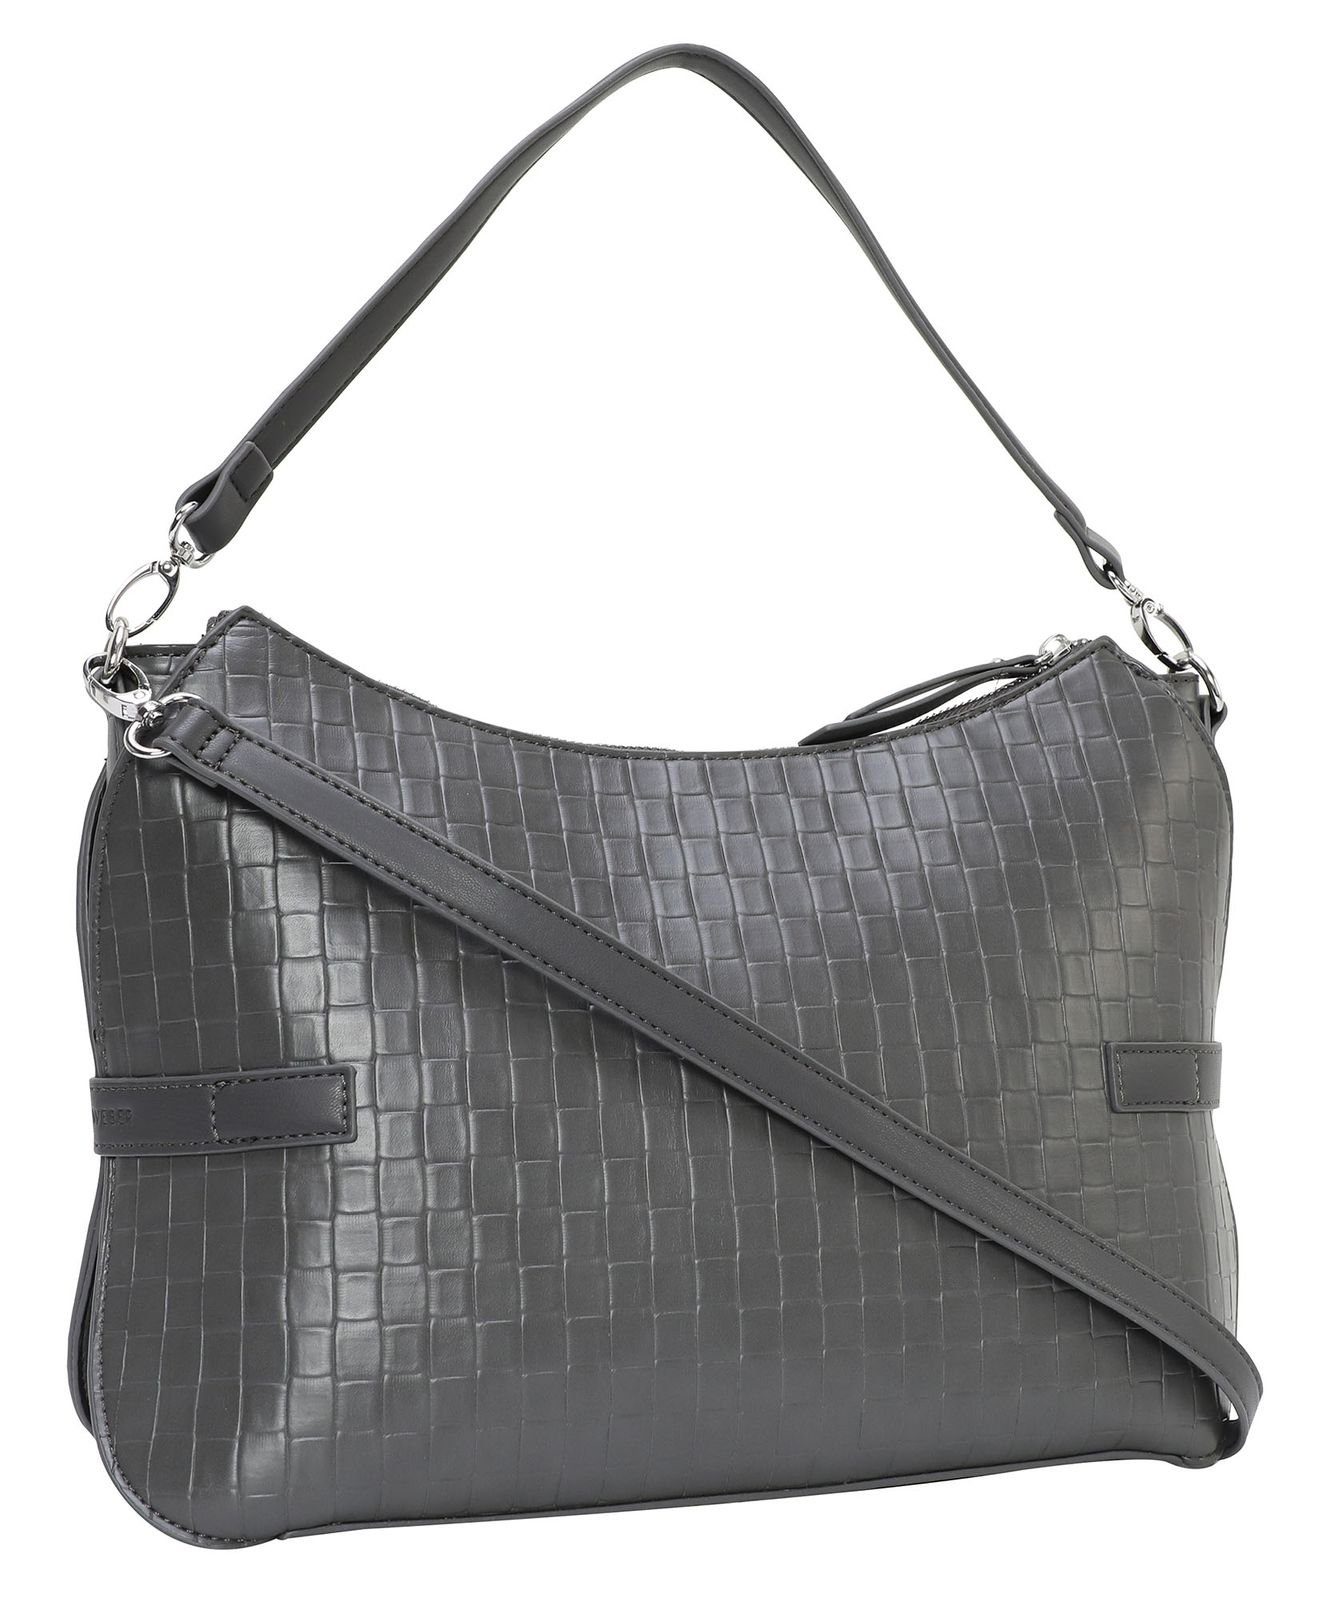 For Schultertasche WEBER GERRY Me Grey Fall